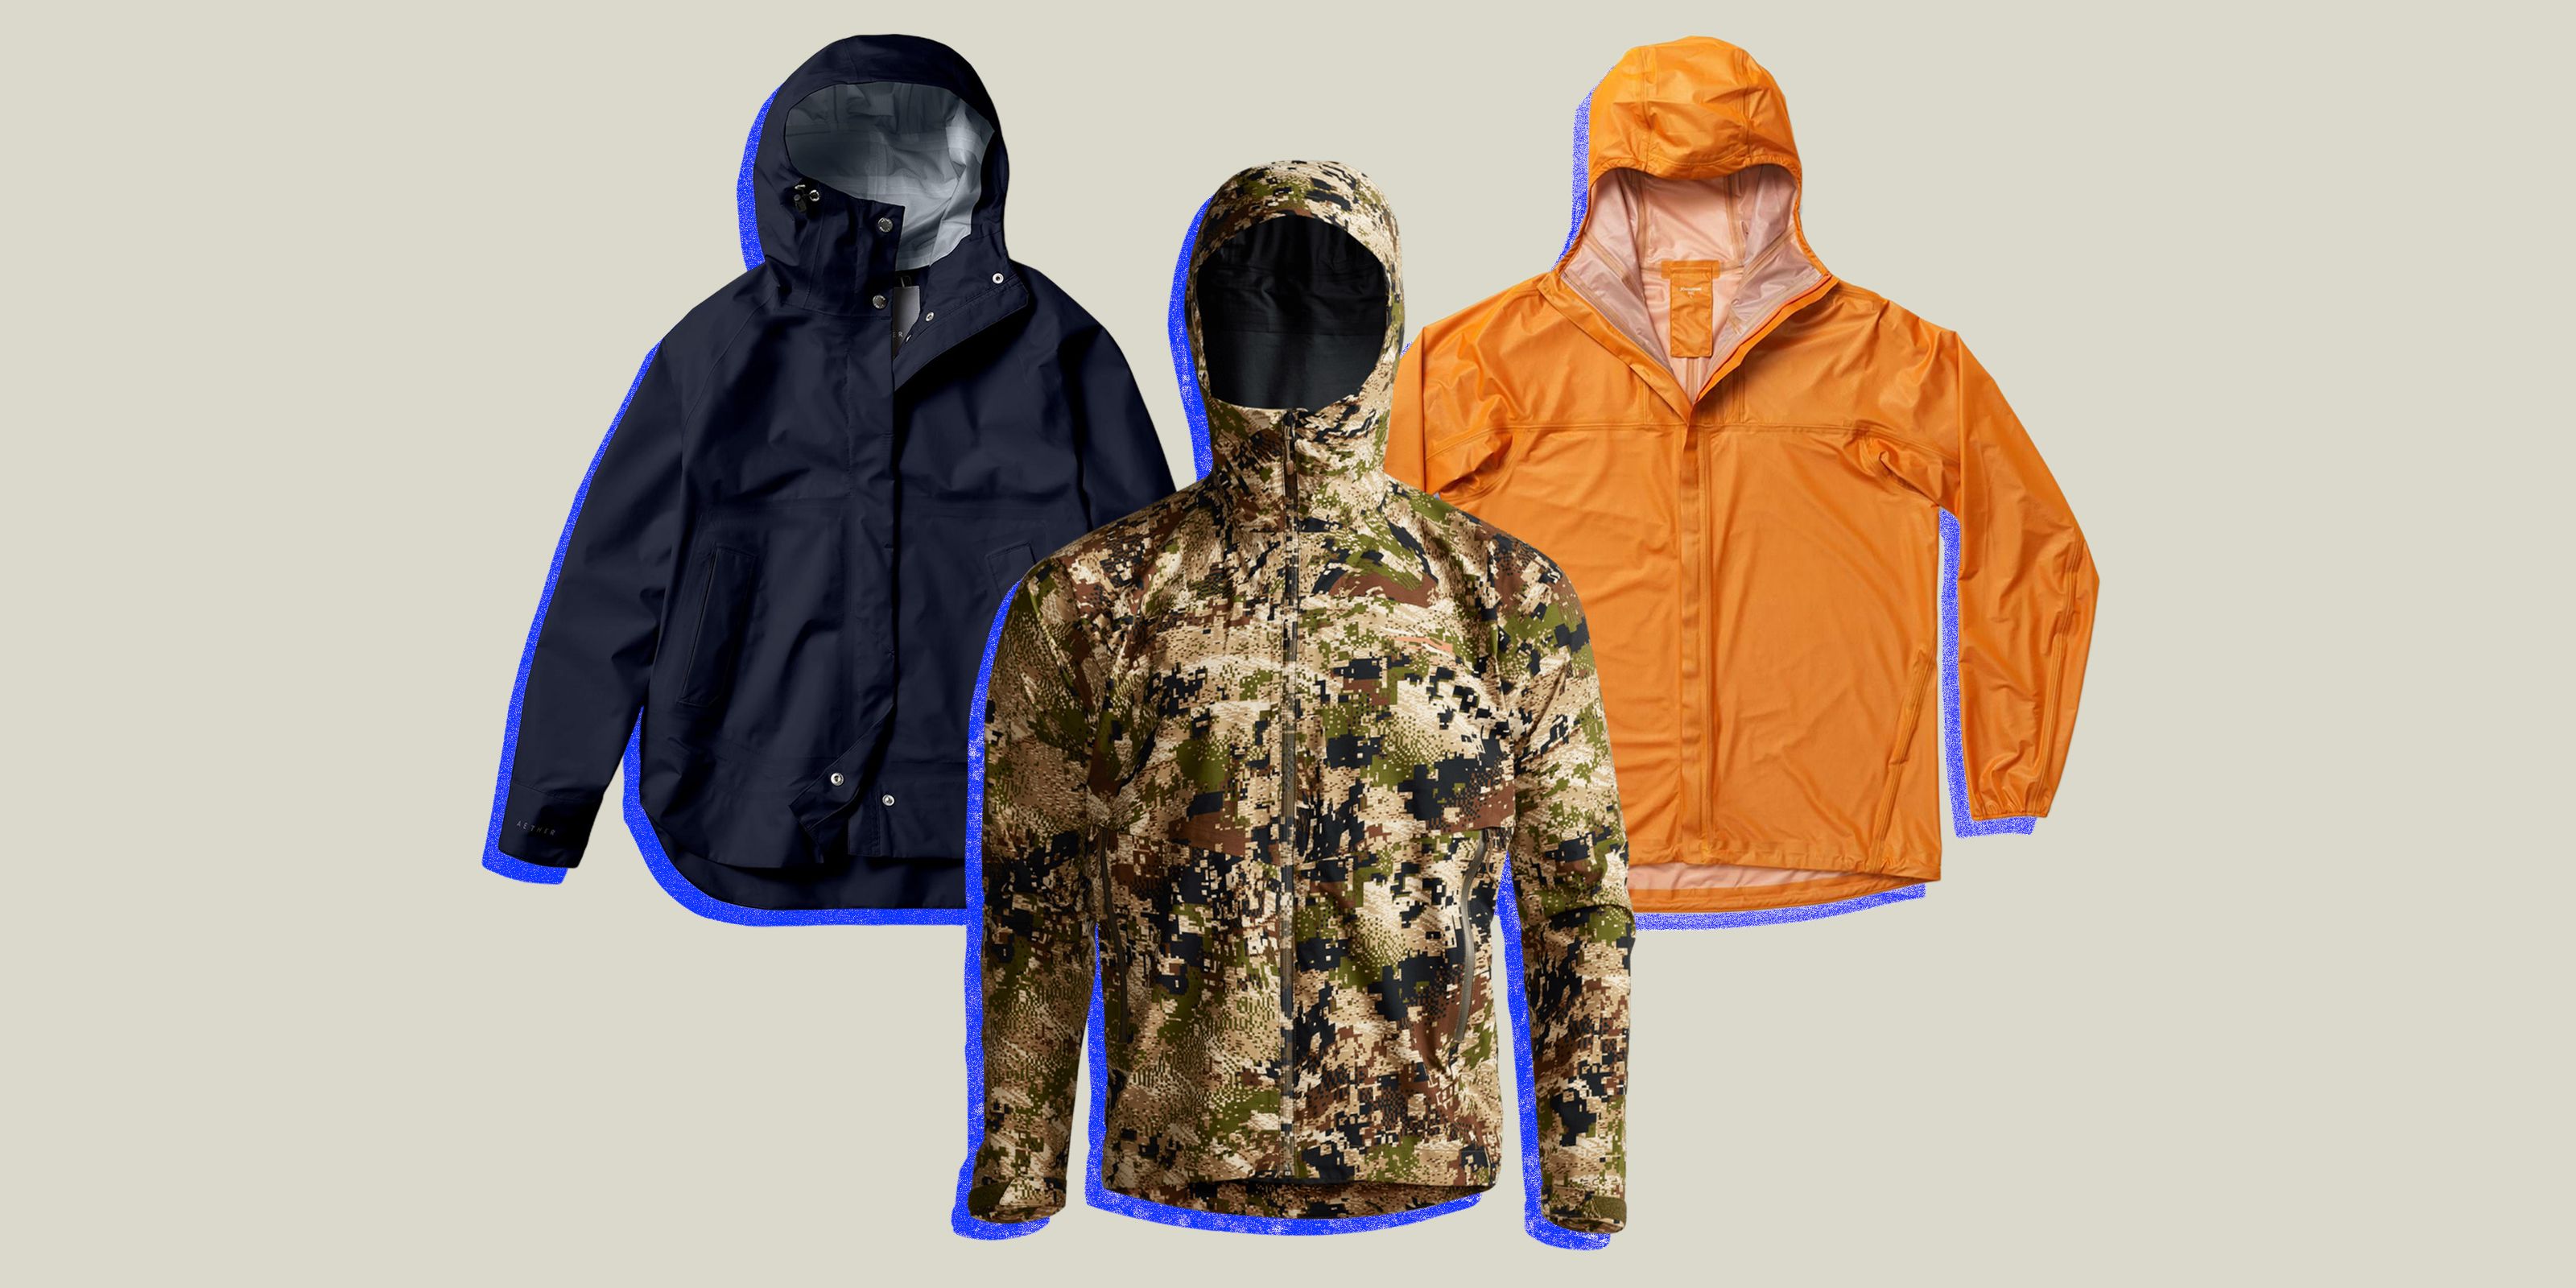 The Best Rain Jackets You Can Buy to Keep You Dry